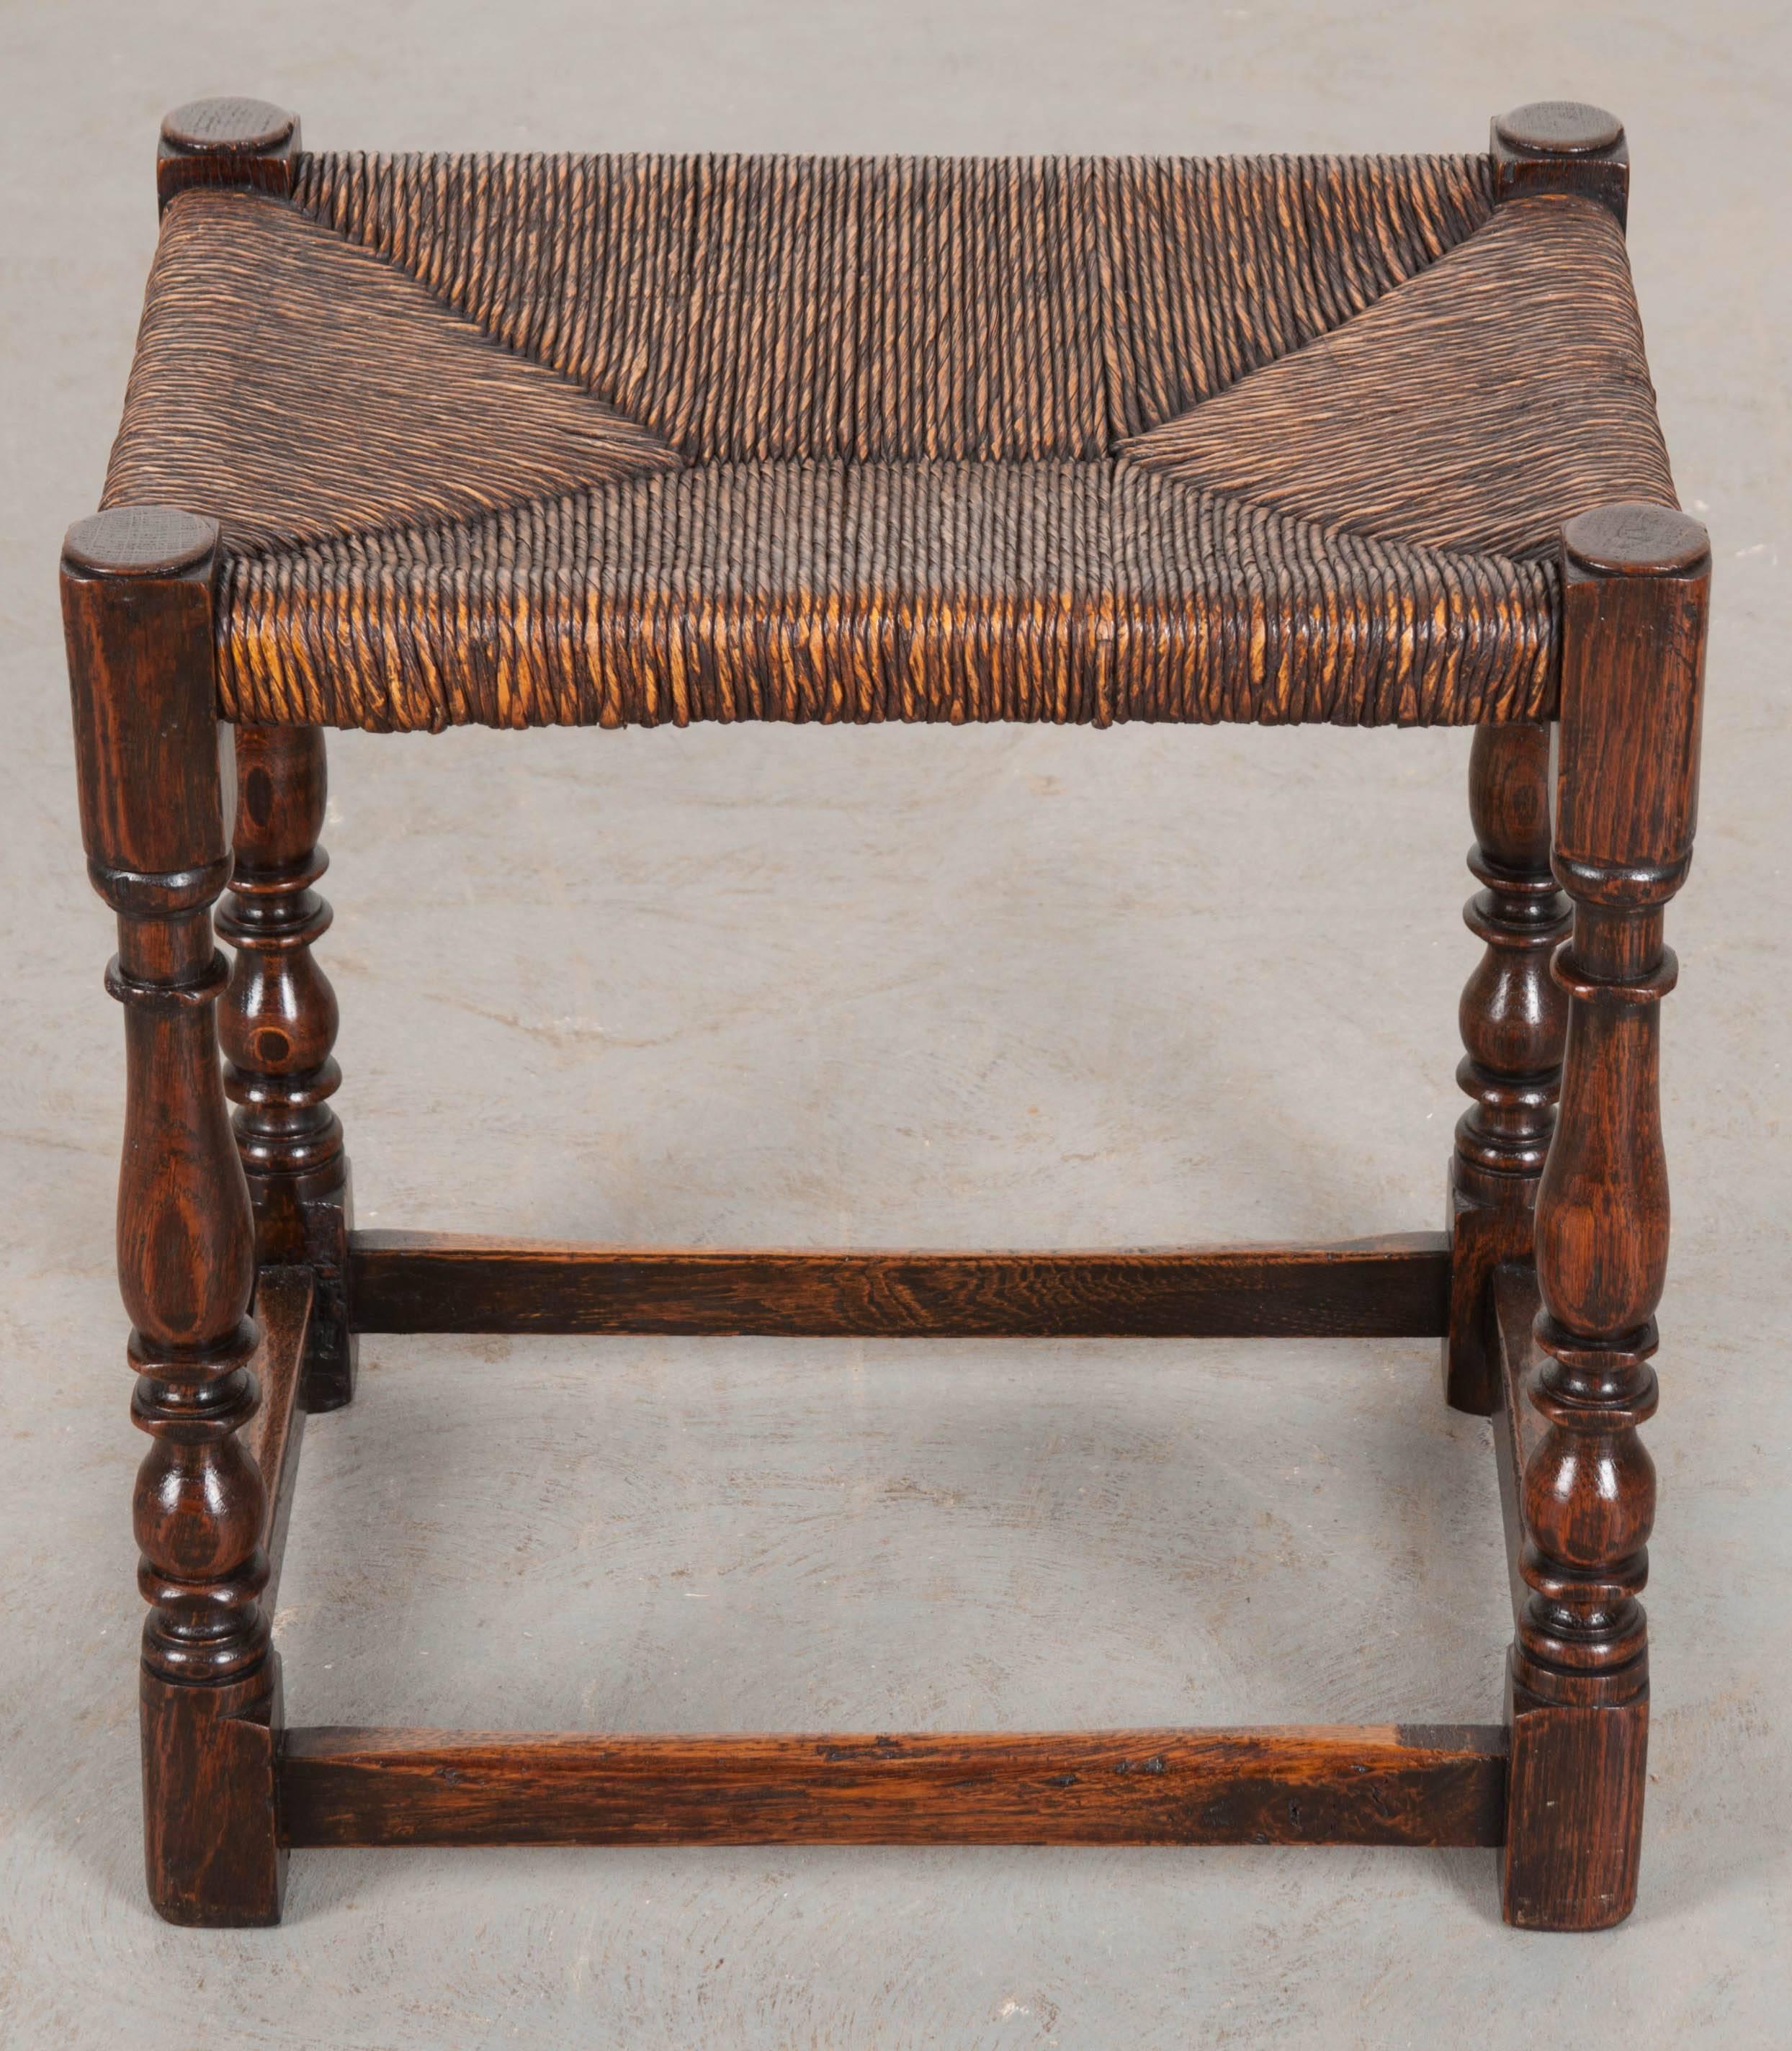 This excellent little stool comes from England and was made towards the end of the 19th century. The rush seat is in exceptionally wonderful condition given its age and somewhat delicate nature. The four upright supports have all been expertly